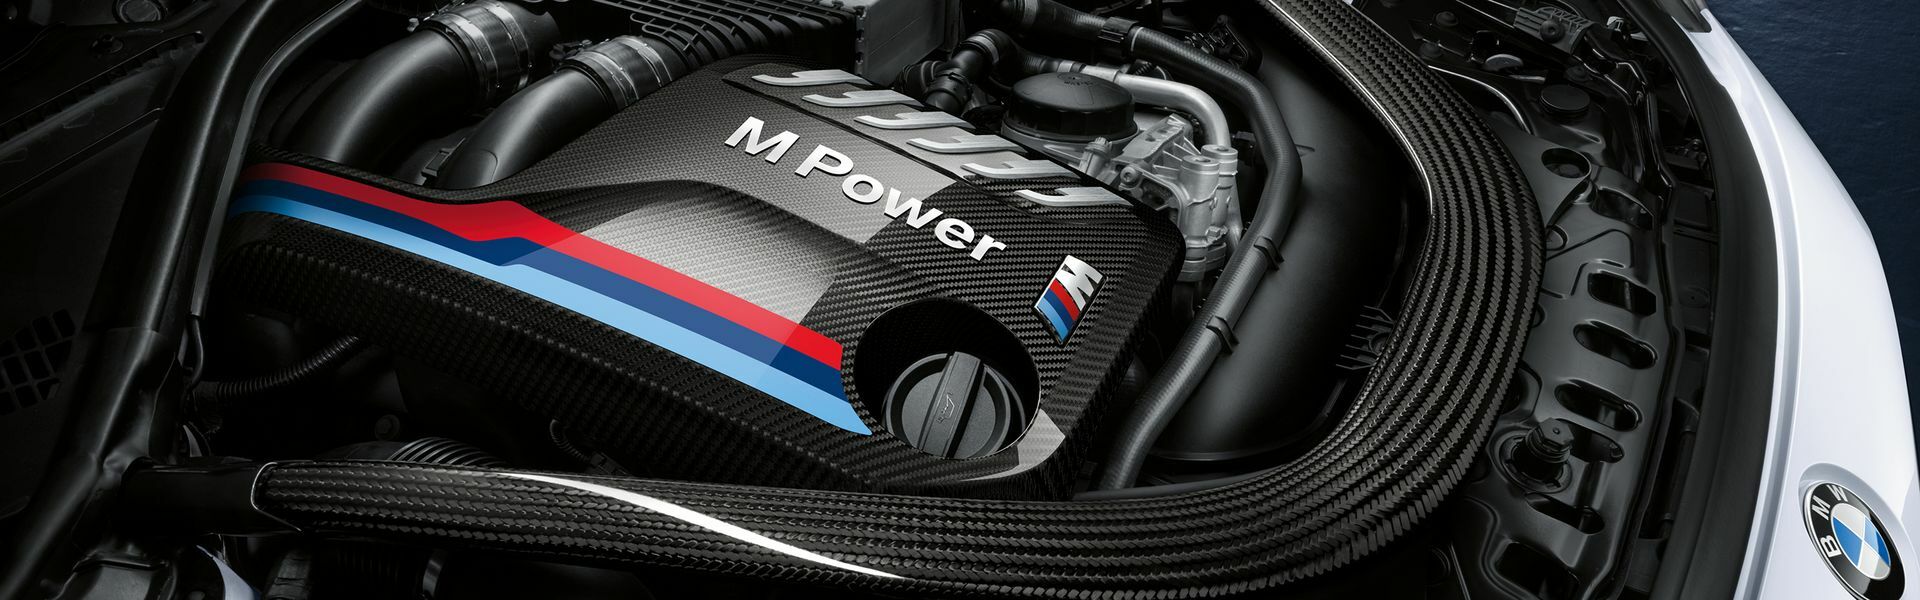 Performance enhancements/ Software modifications/ Small performance parts for BWM X6 50i